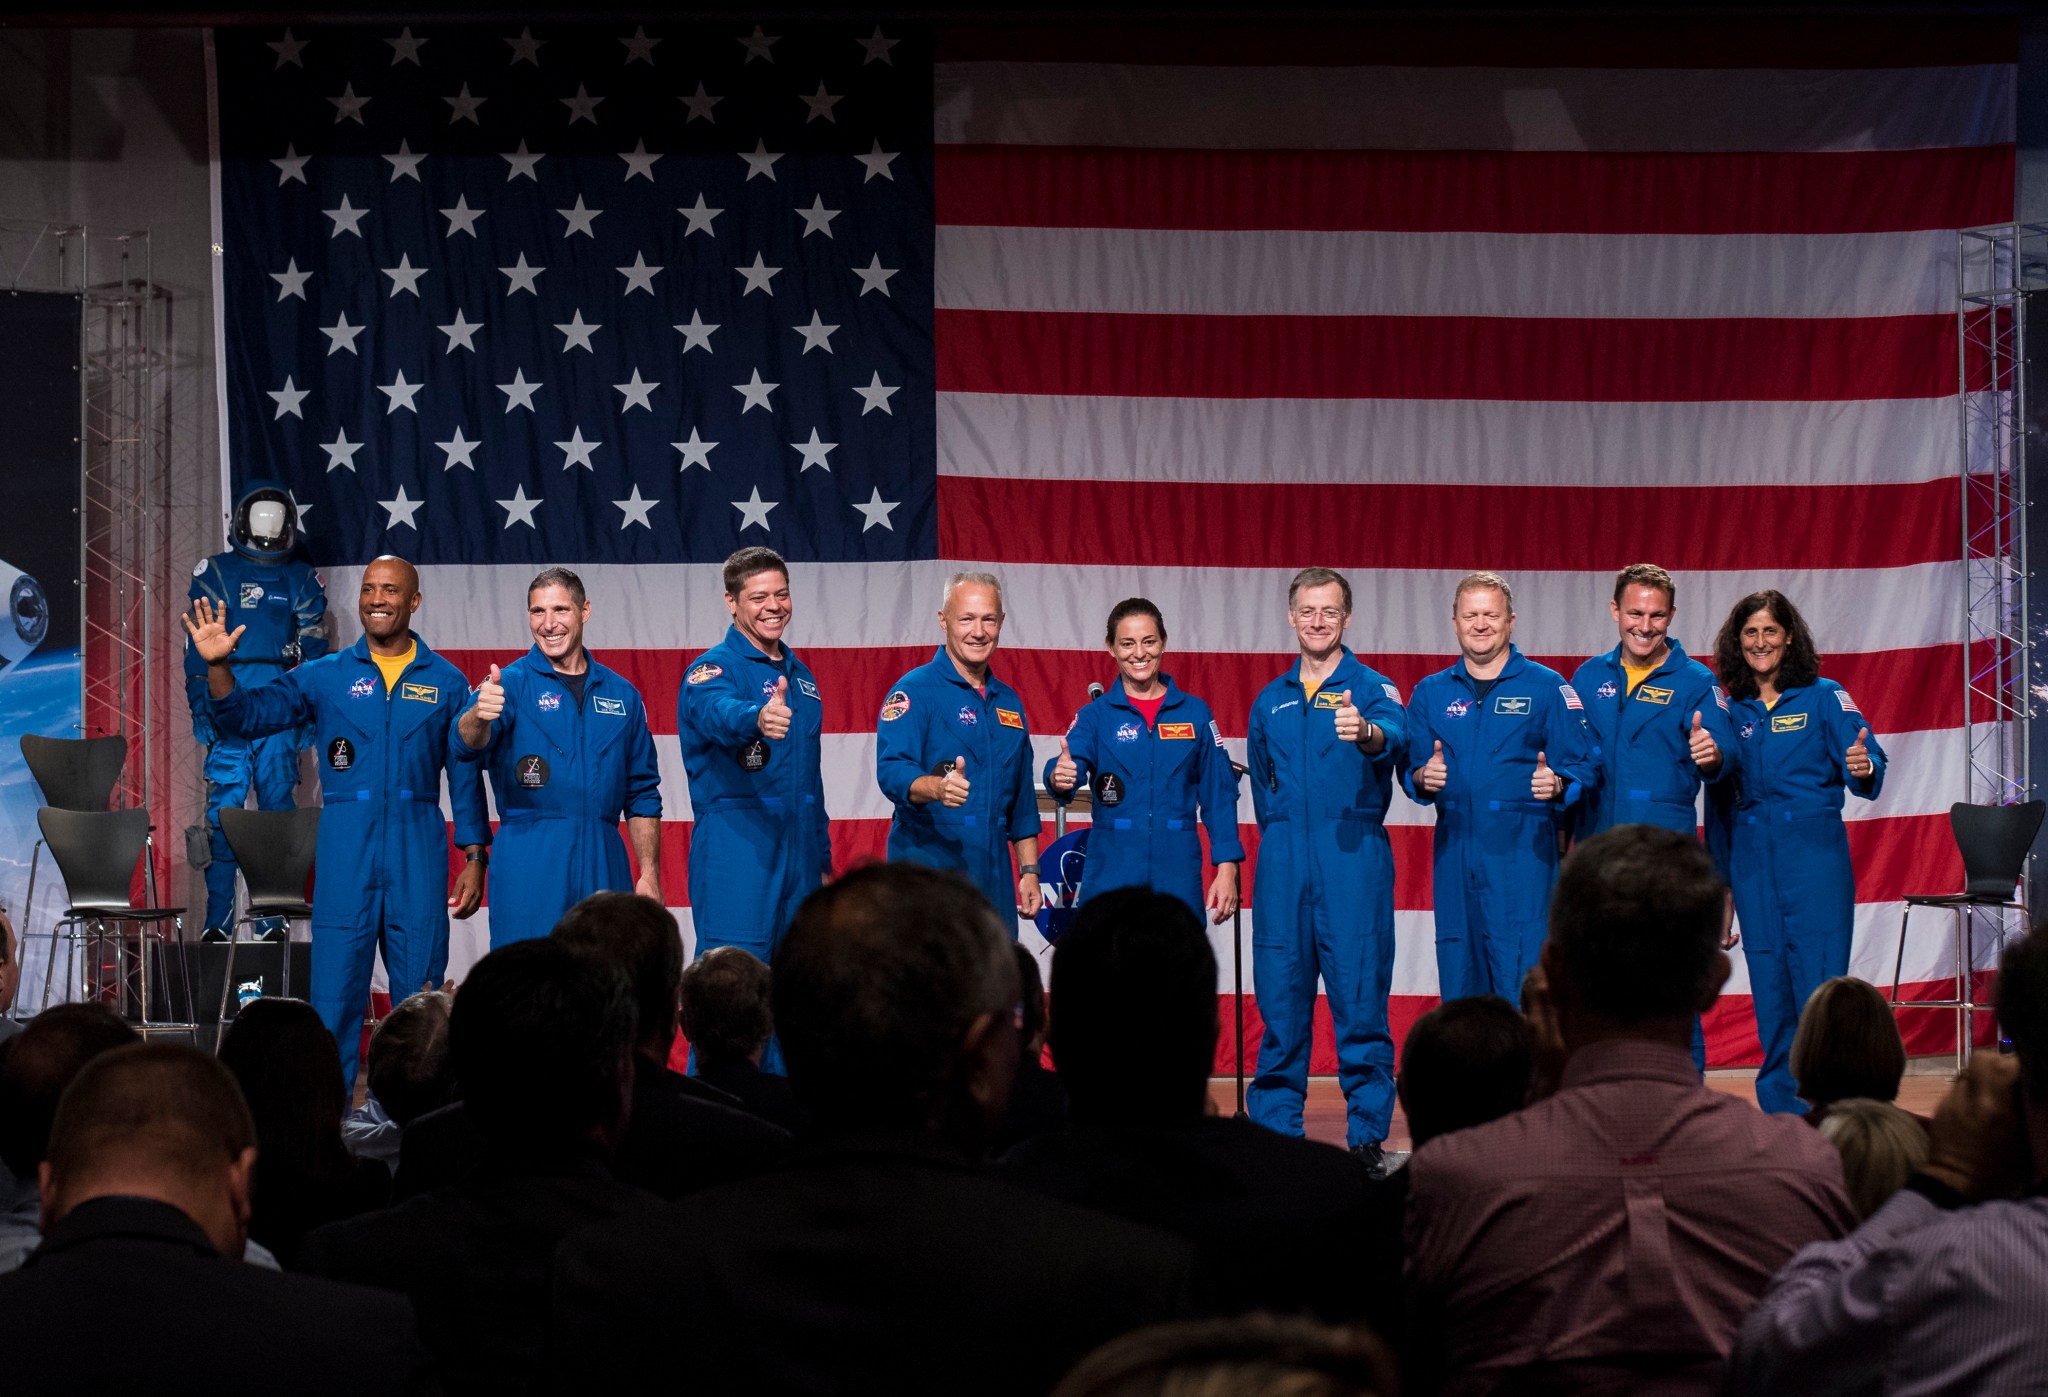 The first U.S. astronauts who will fly on American-made, commercial spacecraft to and from the ISS wave after announcement.